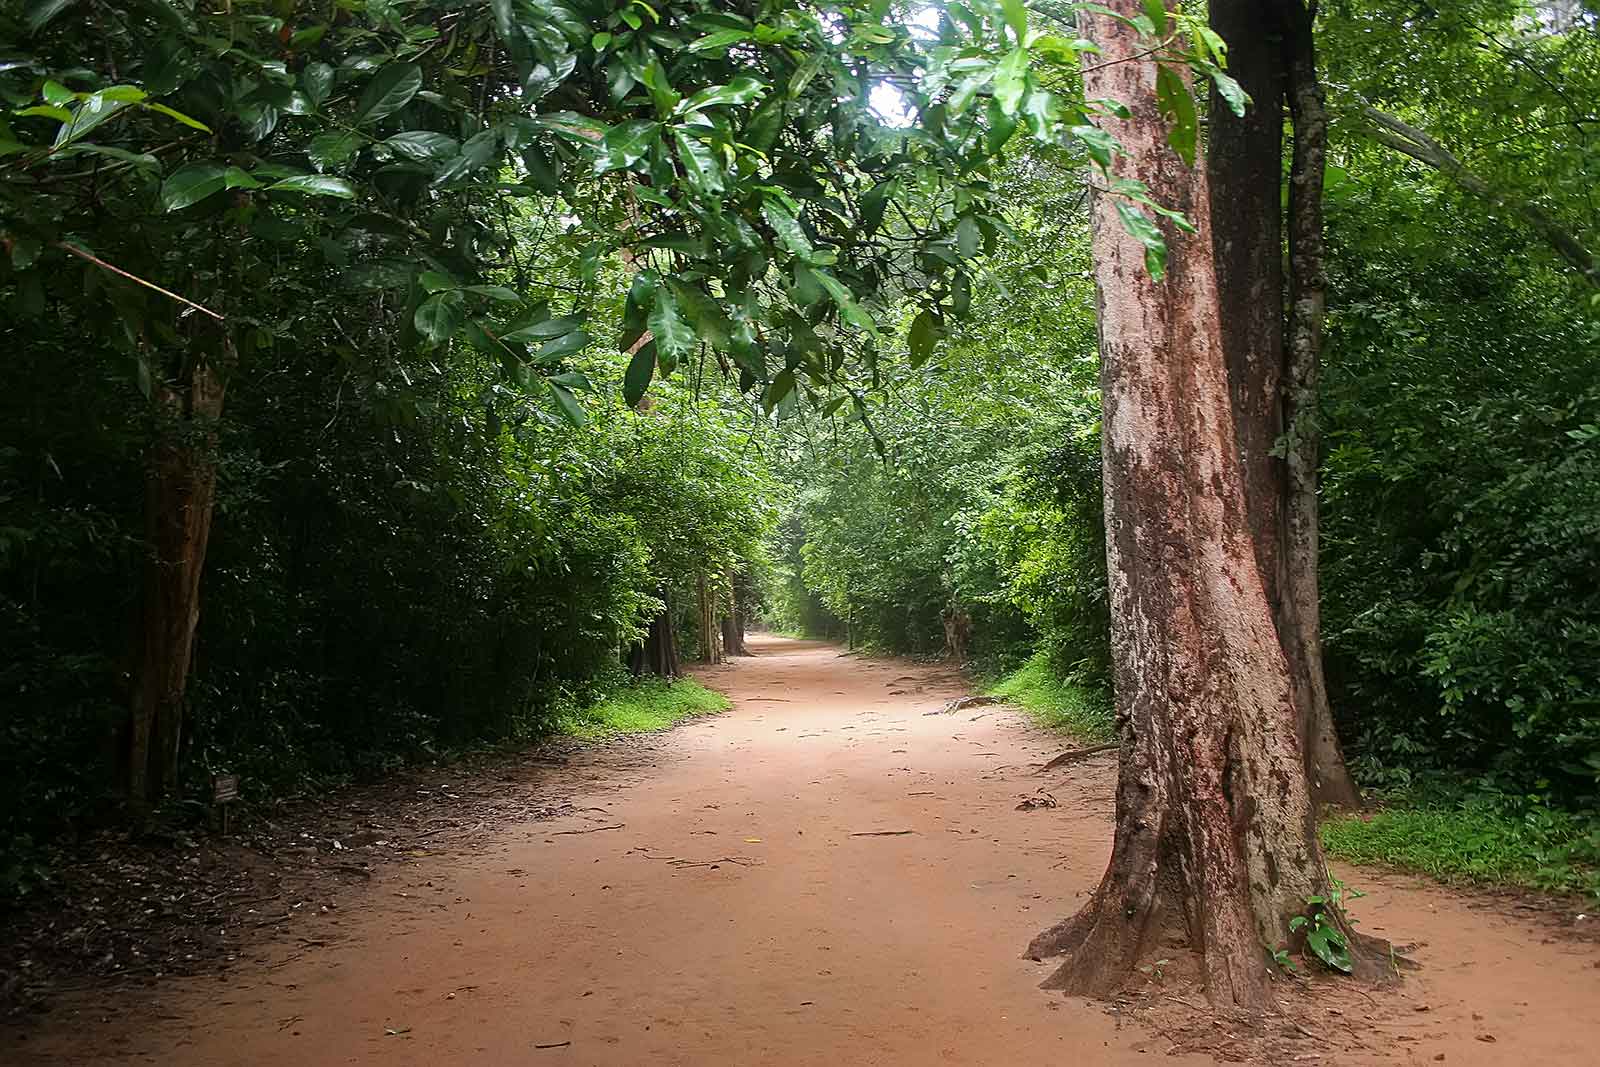 Away from the tourist areas, Angkor can really be a bit spooky.